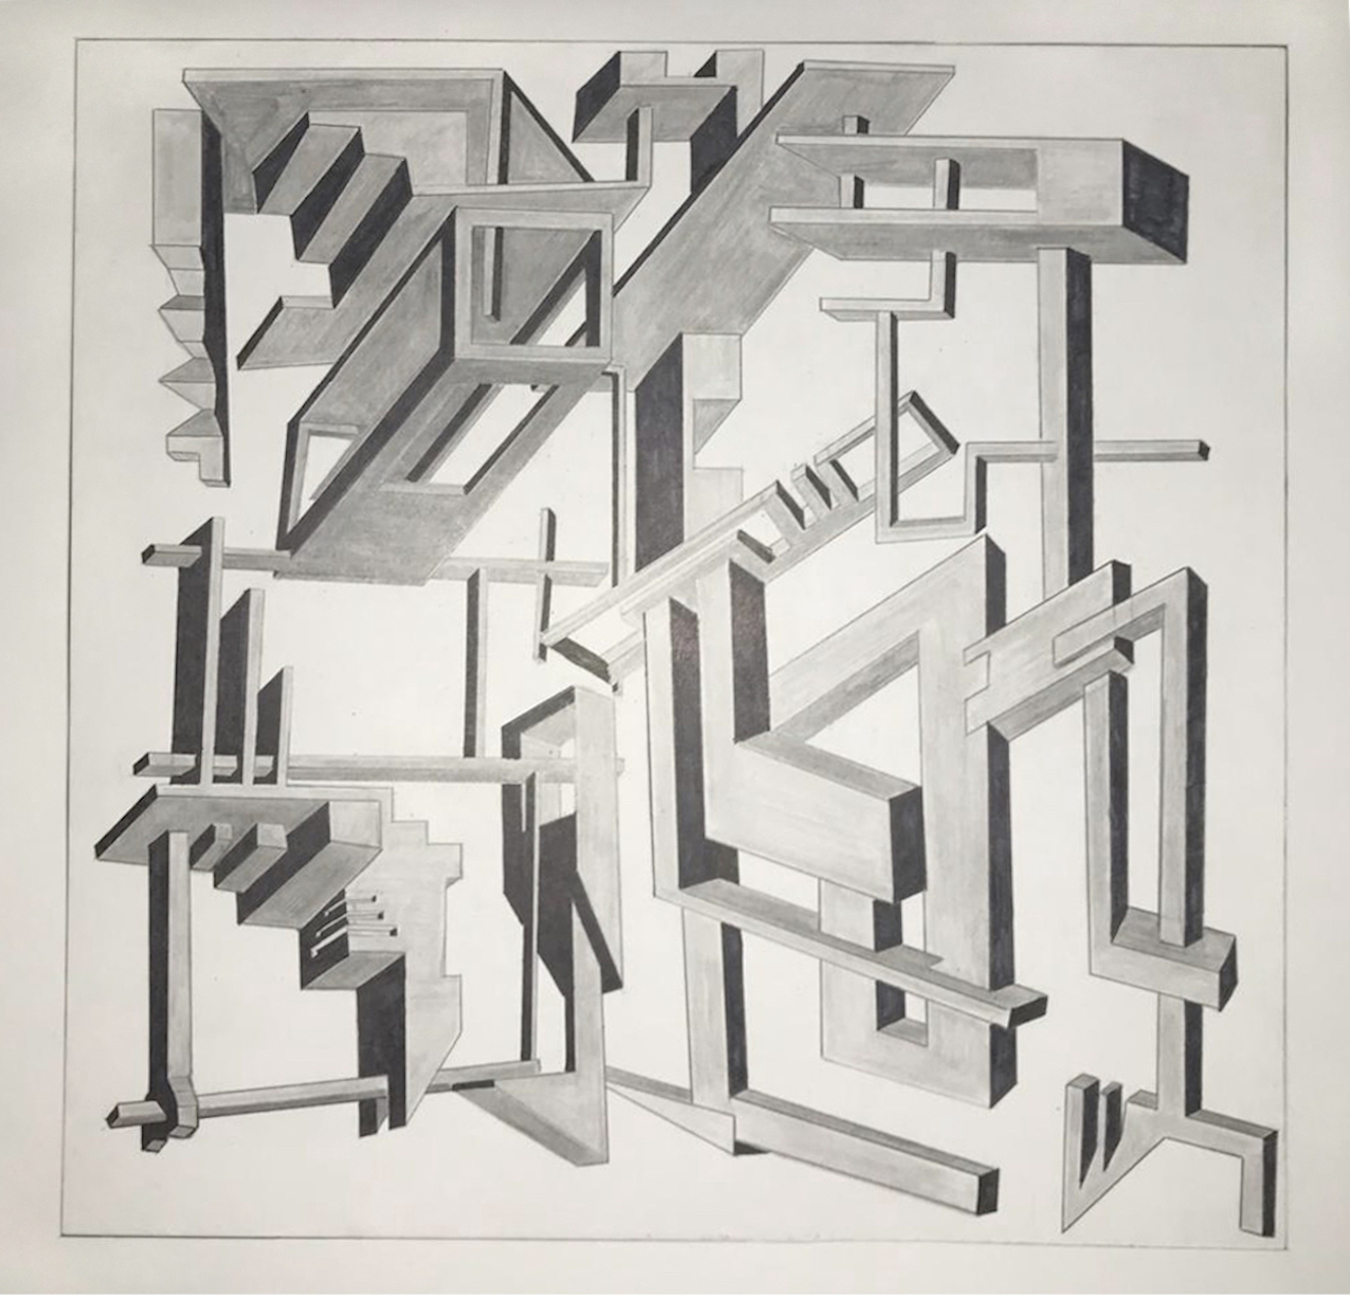 thumbnail of Architectural Abstraction by Daniel Cárdenas Criollo. Medium: Graphite on bristol. Size 10 x 10 inches